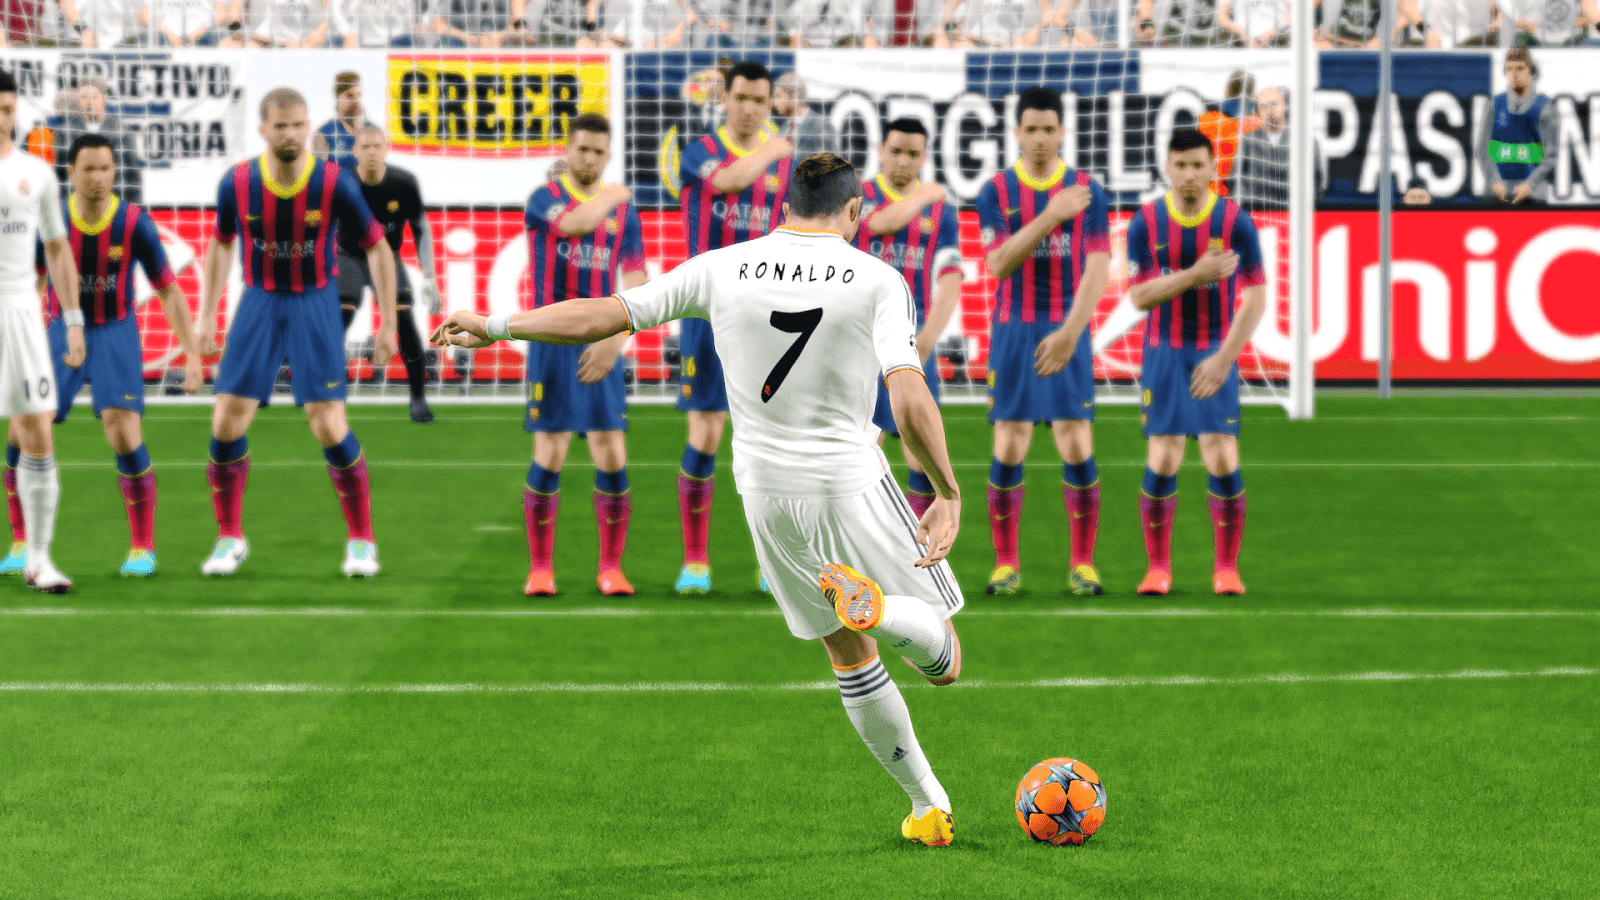 PES 2016 PC Games Free Download Full Version Highly Compressed